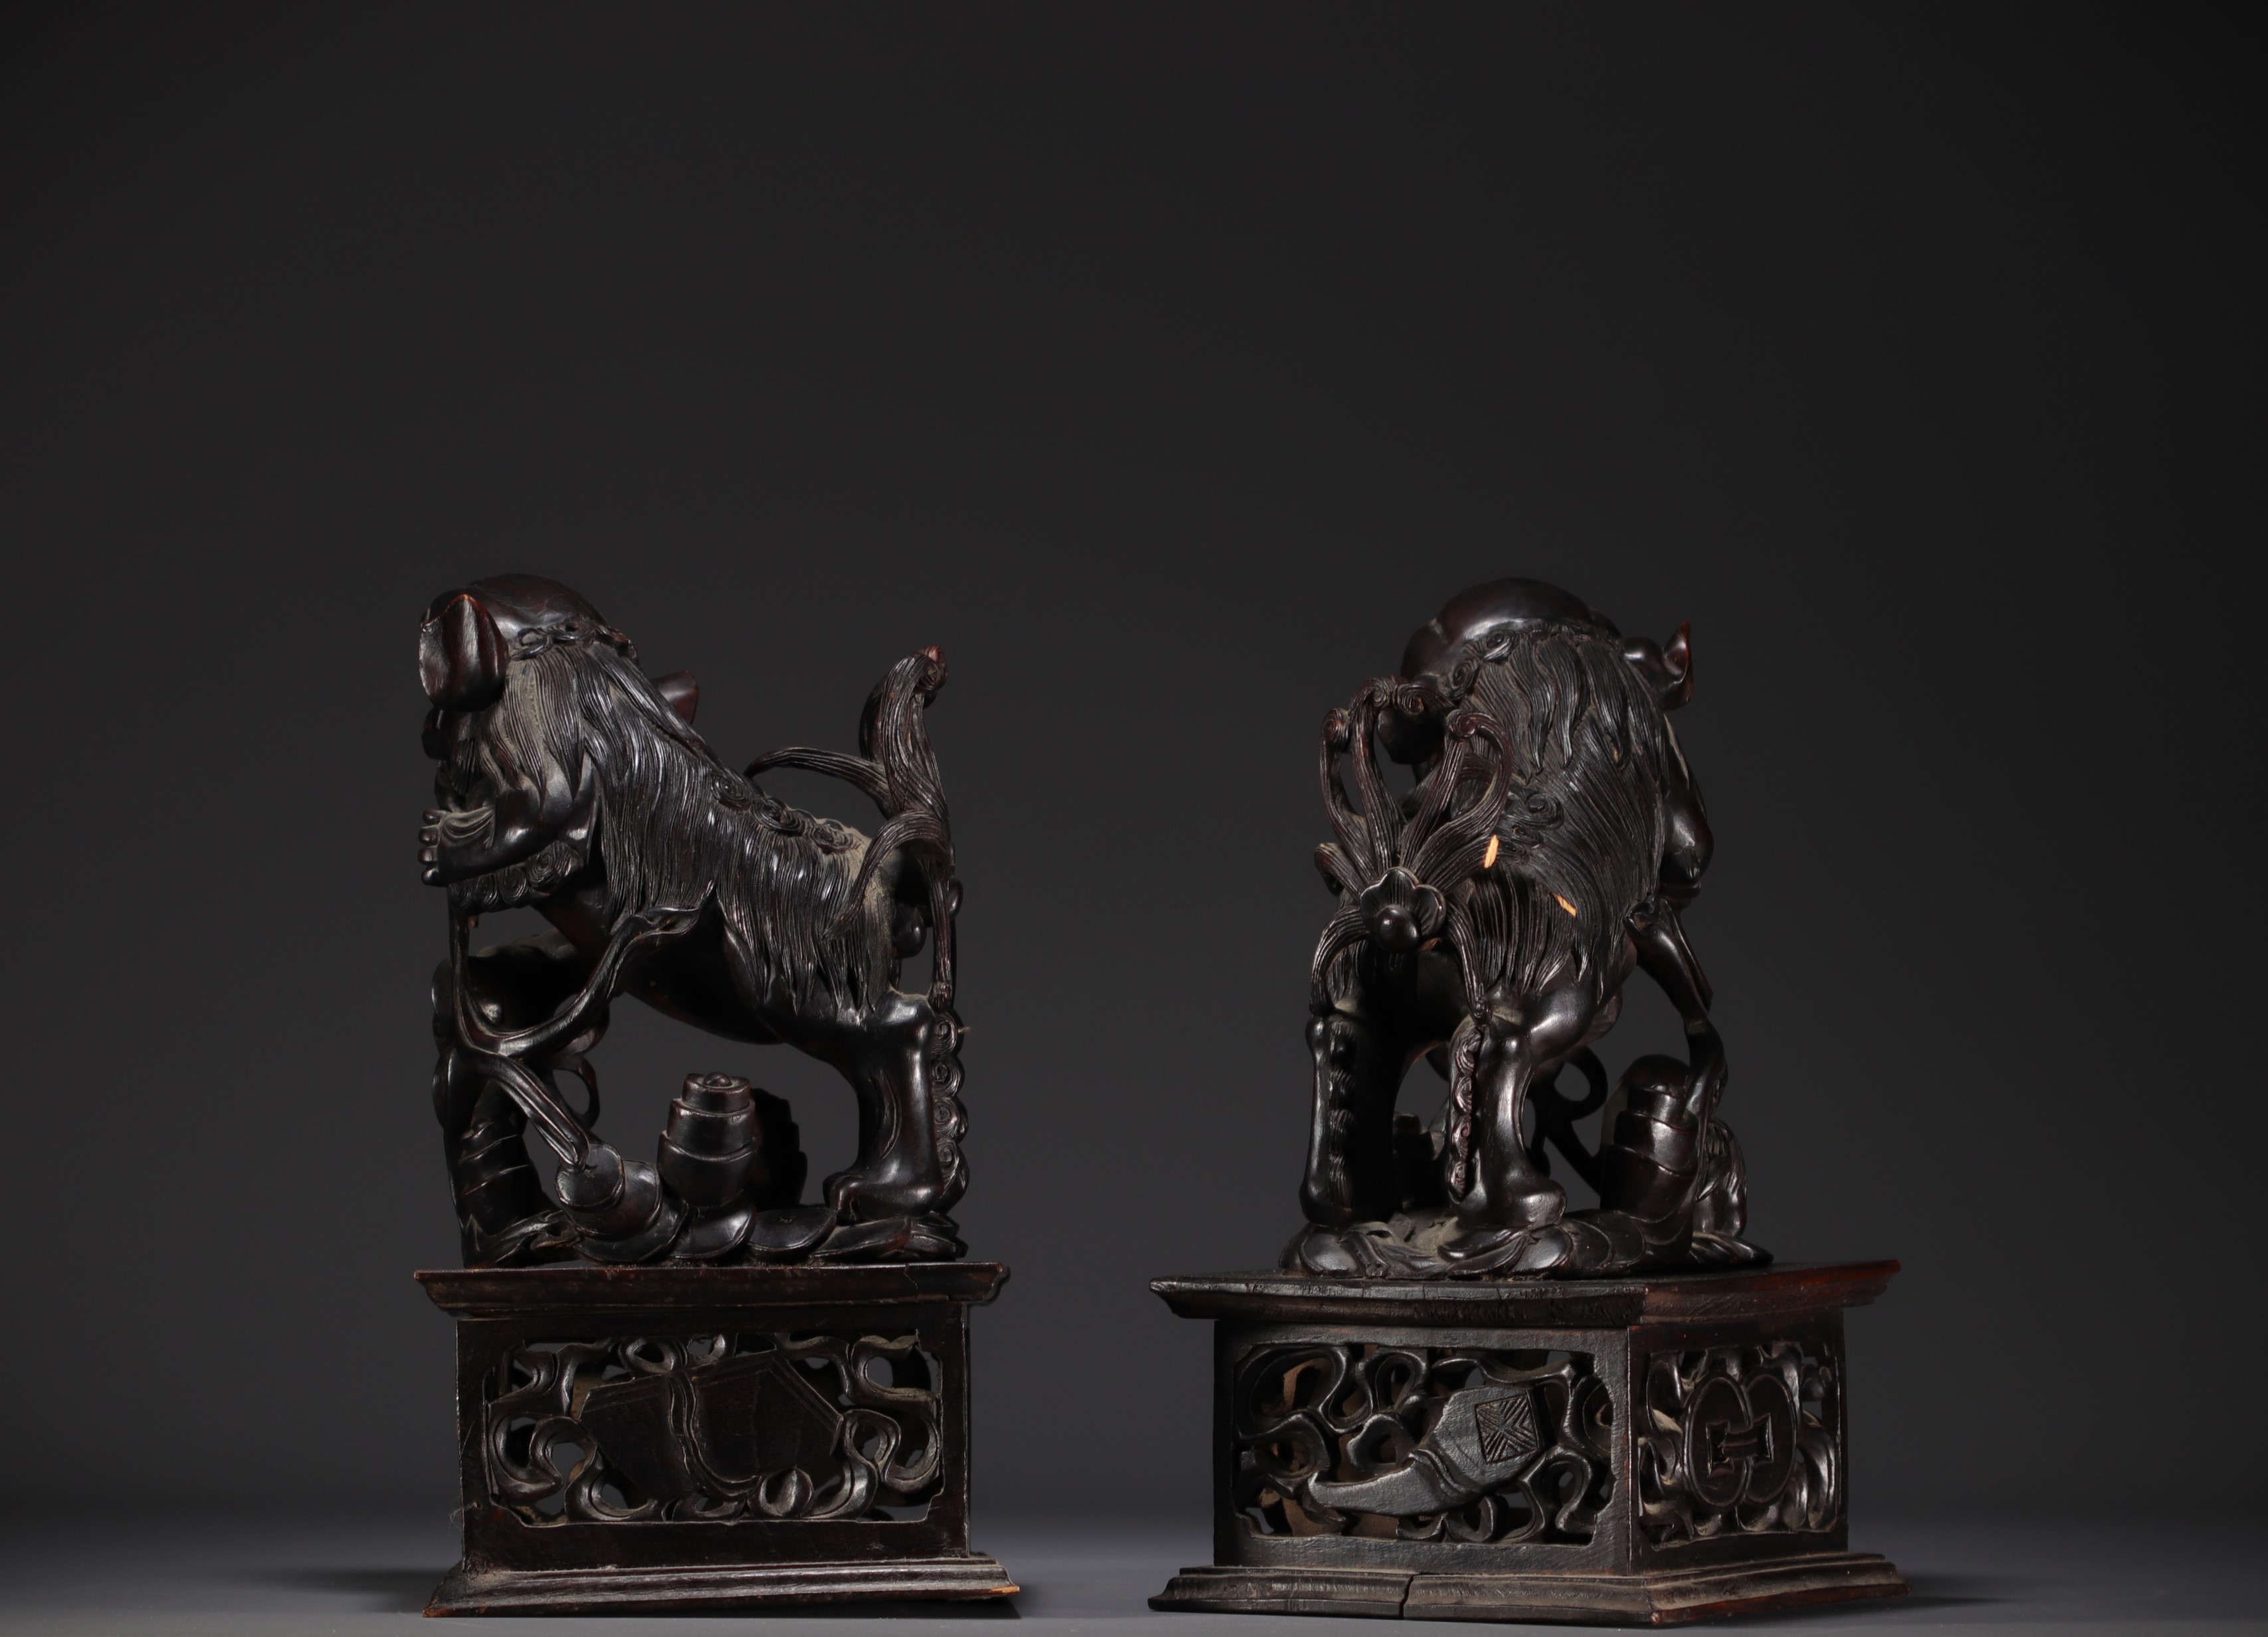 China - Pair of Fo dogs, temple guardians, carved wood, 19th century. - Image 3 of 3